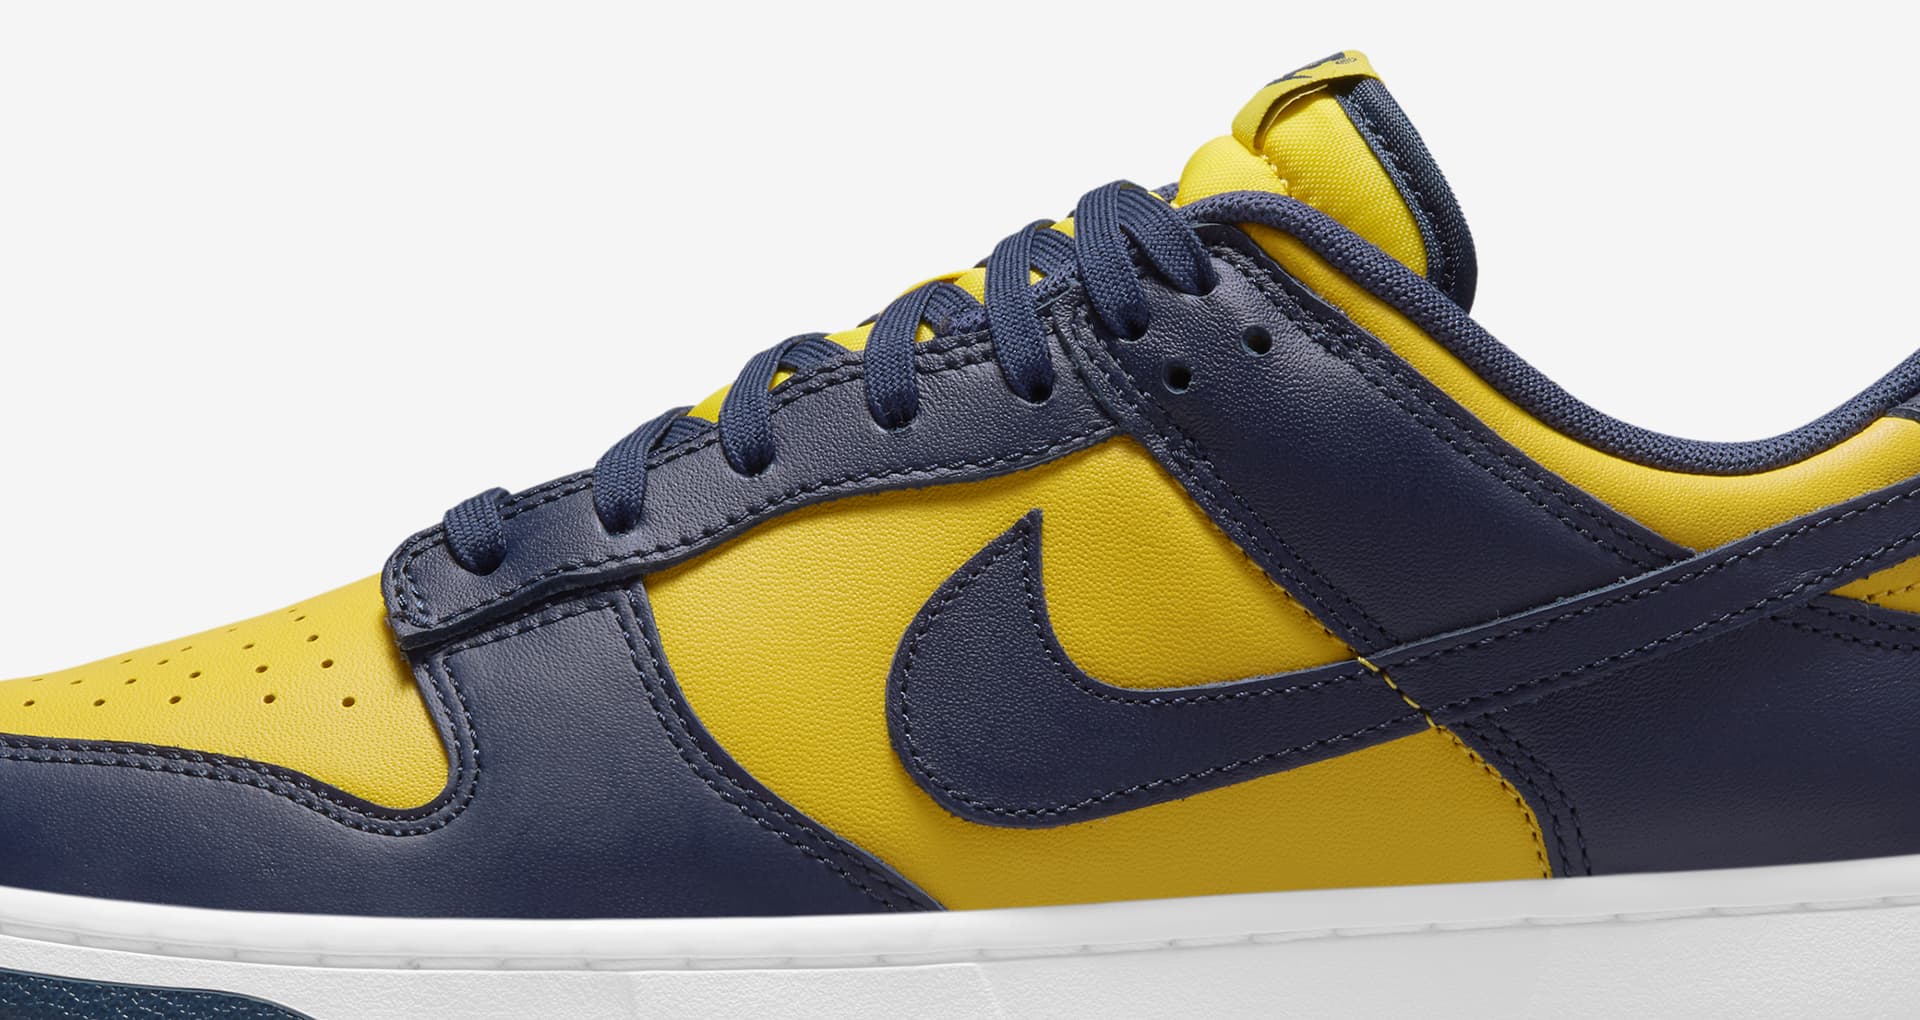 Dunk Low 'Varsity Maize' Release Date. Nike SNKRS MY